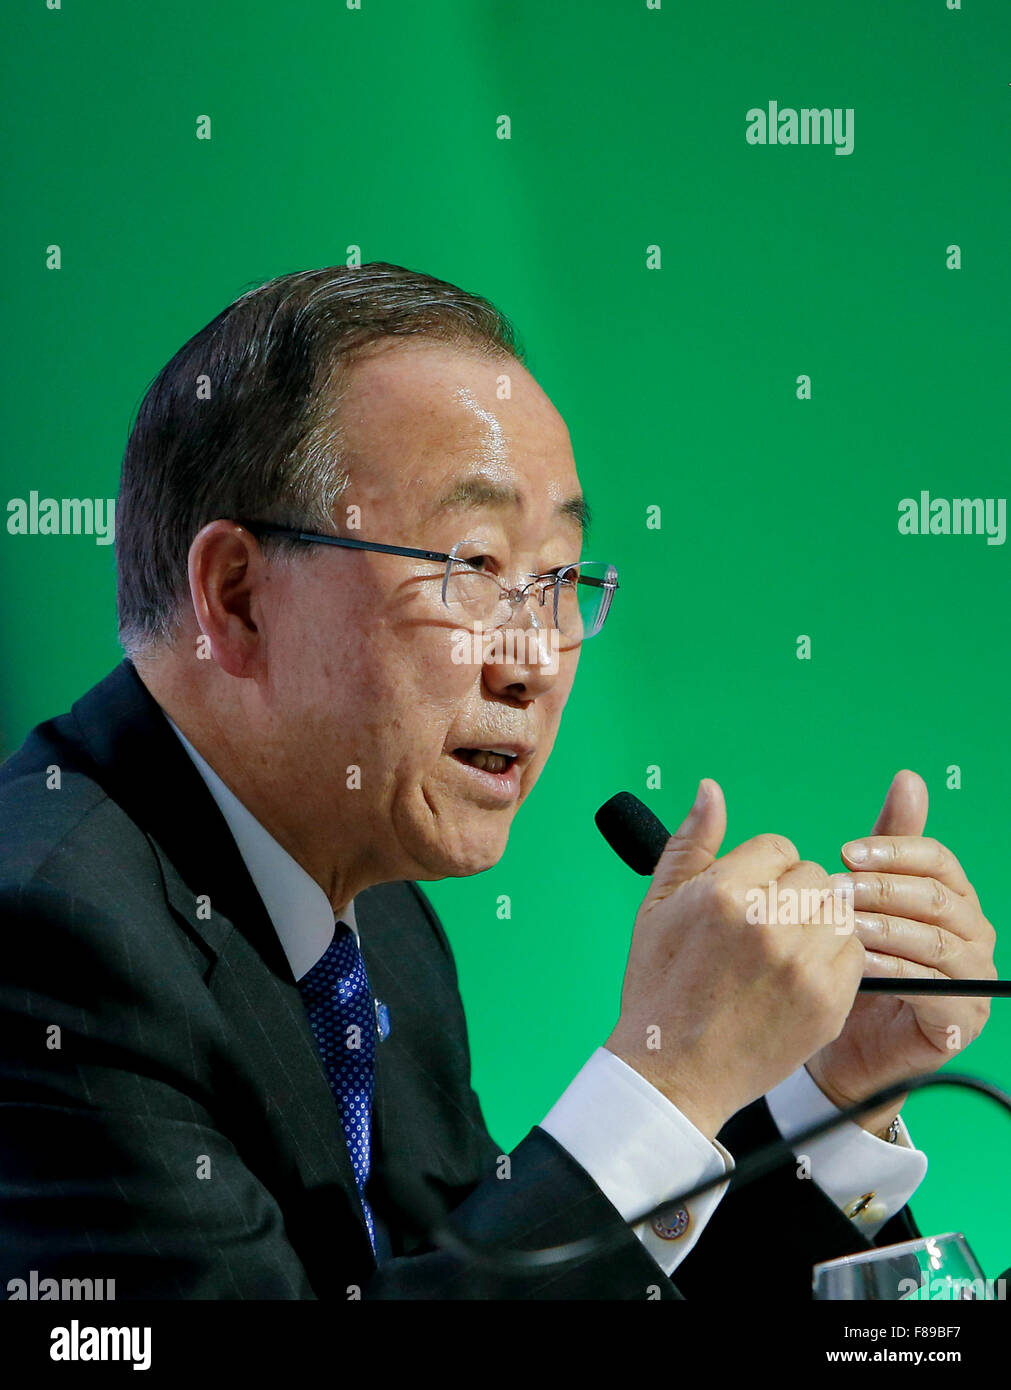 Paris, France. 7th December, 2015. UN Secretary-General Ban Ki-moon speaks at a press conference during Paris Climate Change Conference at Le Bourget on the northern suburb of Paris, France, Dec. 7, 2015. The ministers from all over the world met at the Paris Climate Change Conference, giving final push for the new global climate agreement. Credit:  Xinhua/Alamy Live News Stock Photo